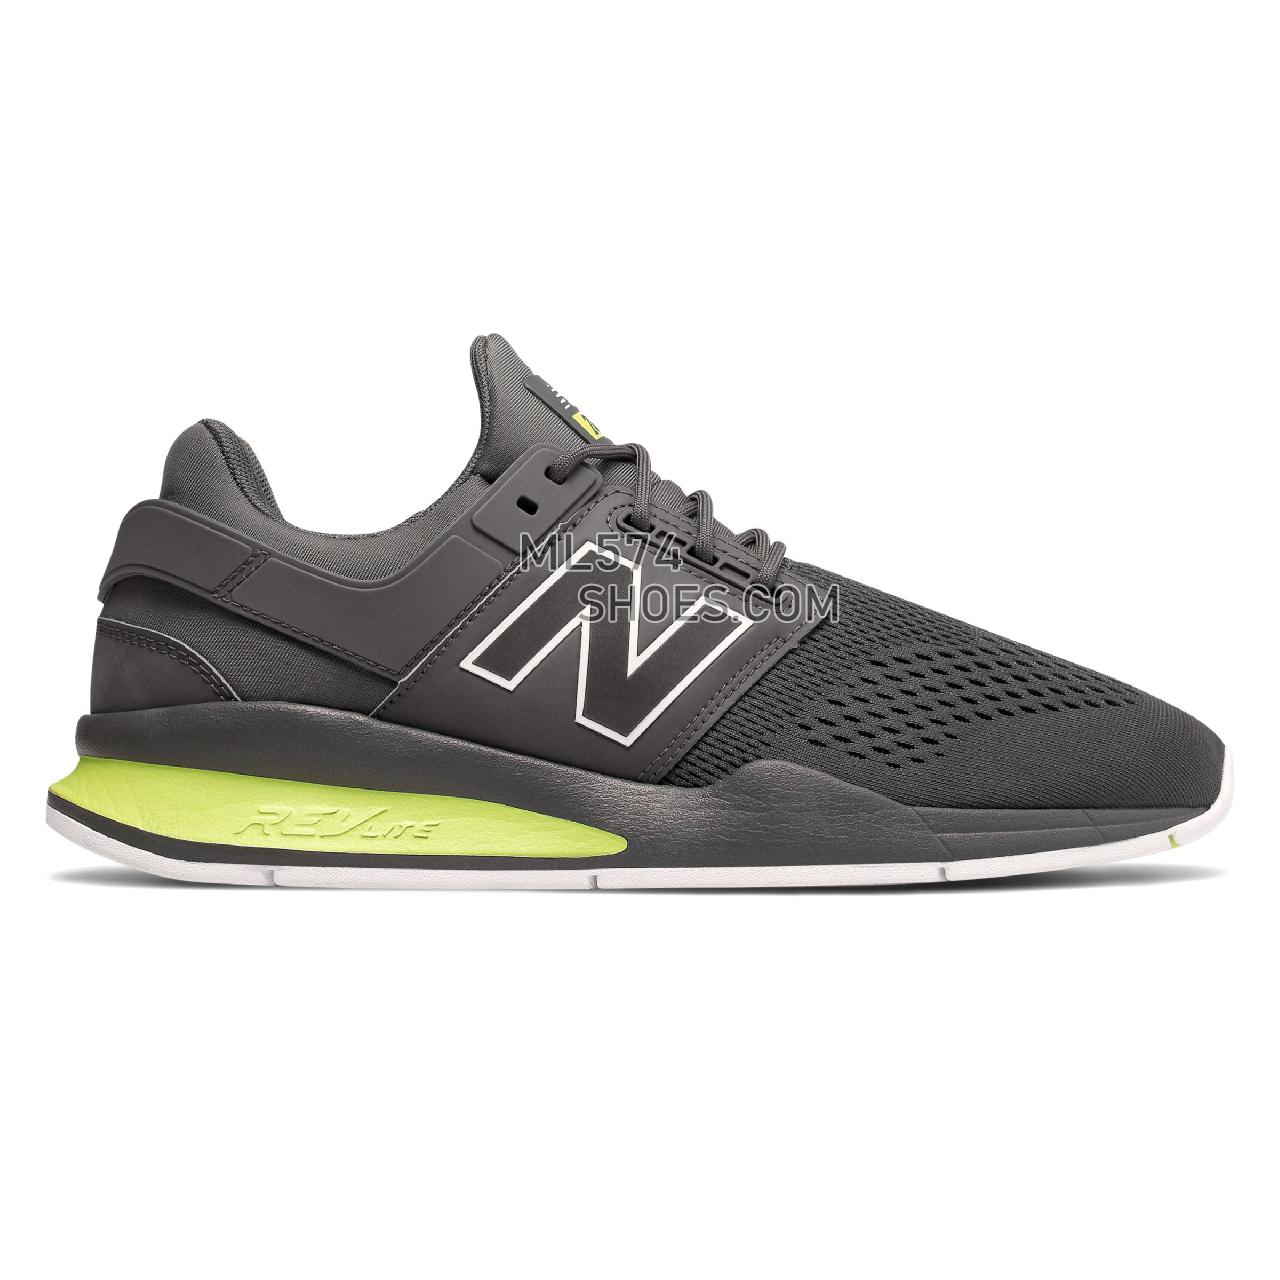 New Balance 247 - Men's 247 - Classic Magnet with Solar Yellow - MS247TG